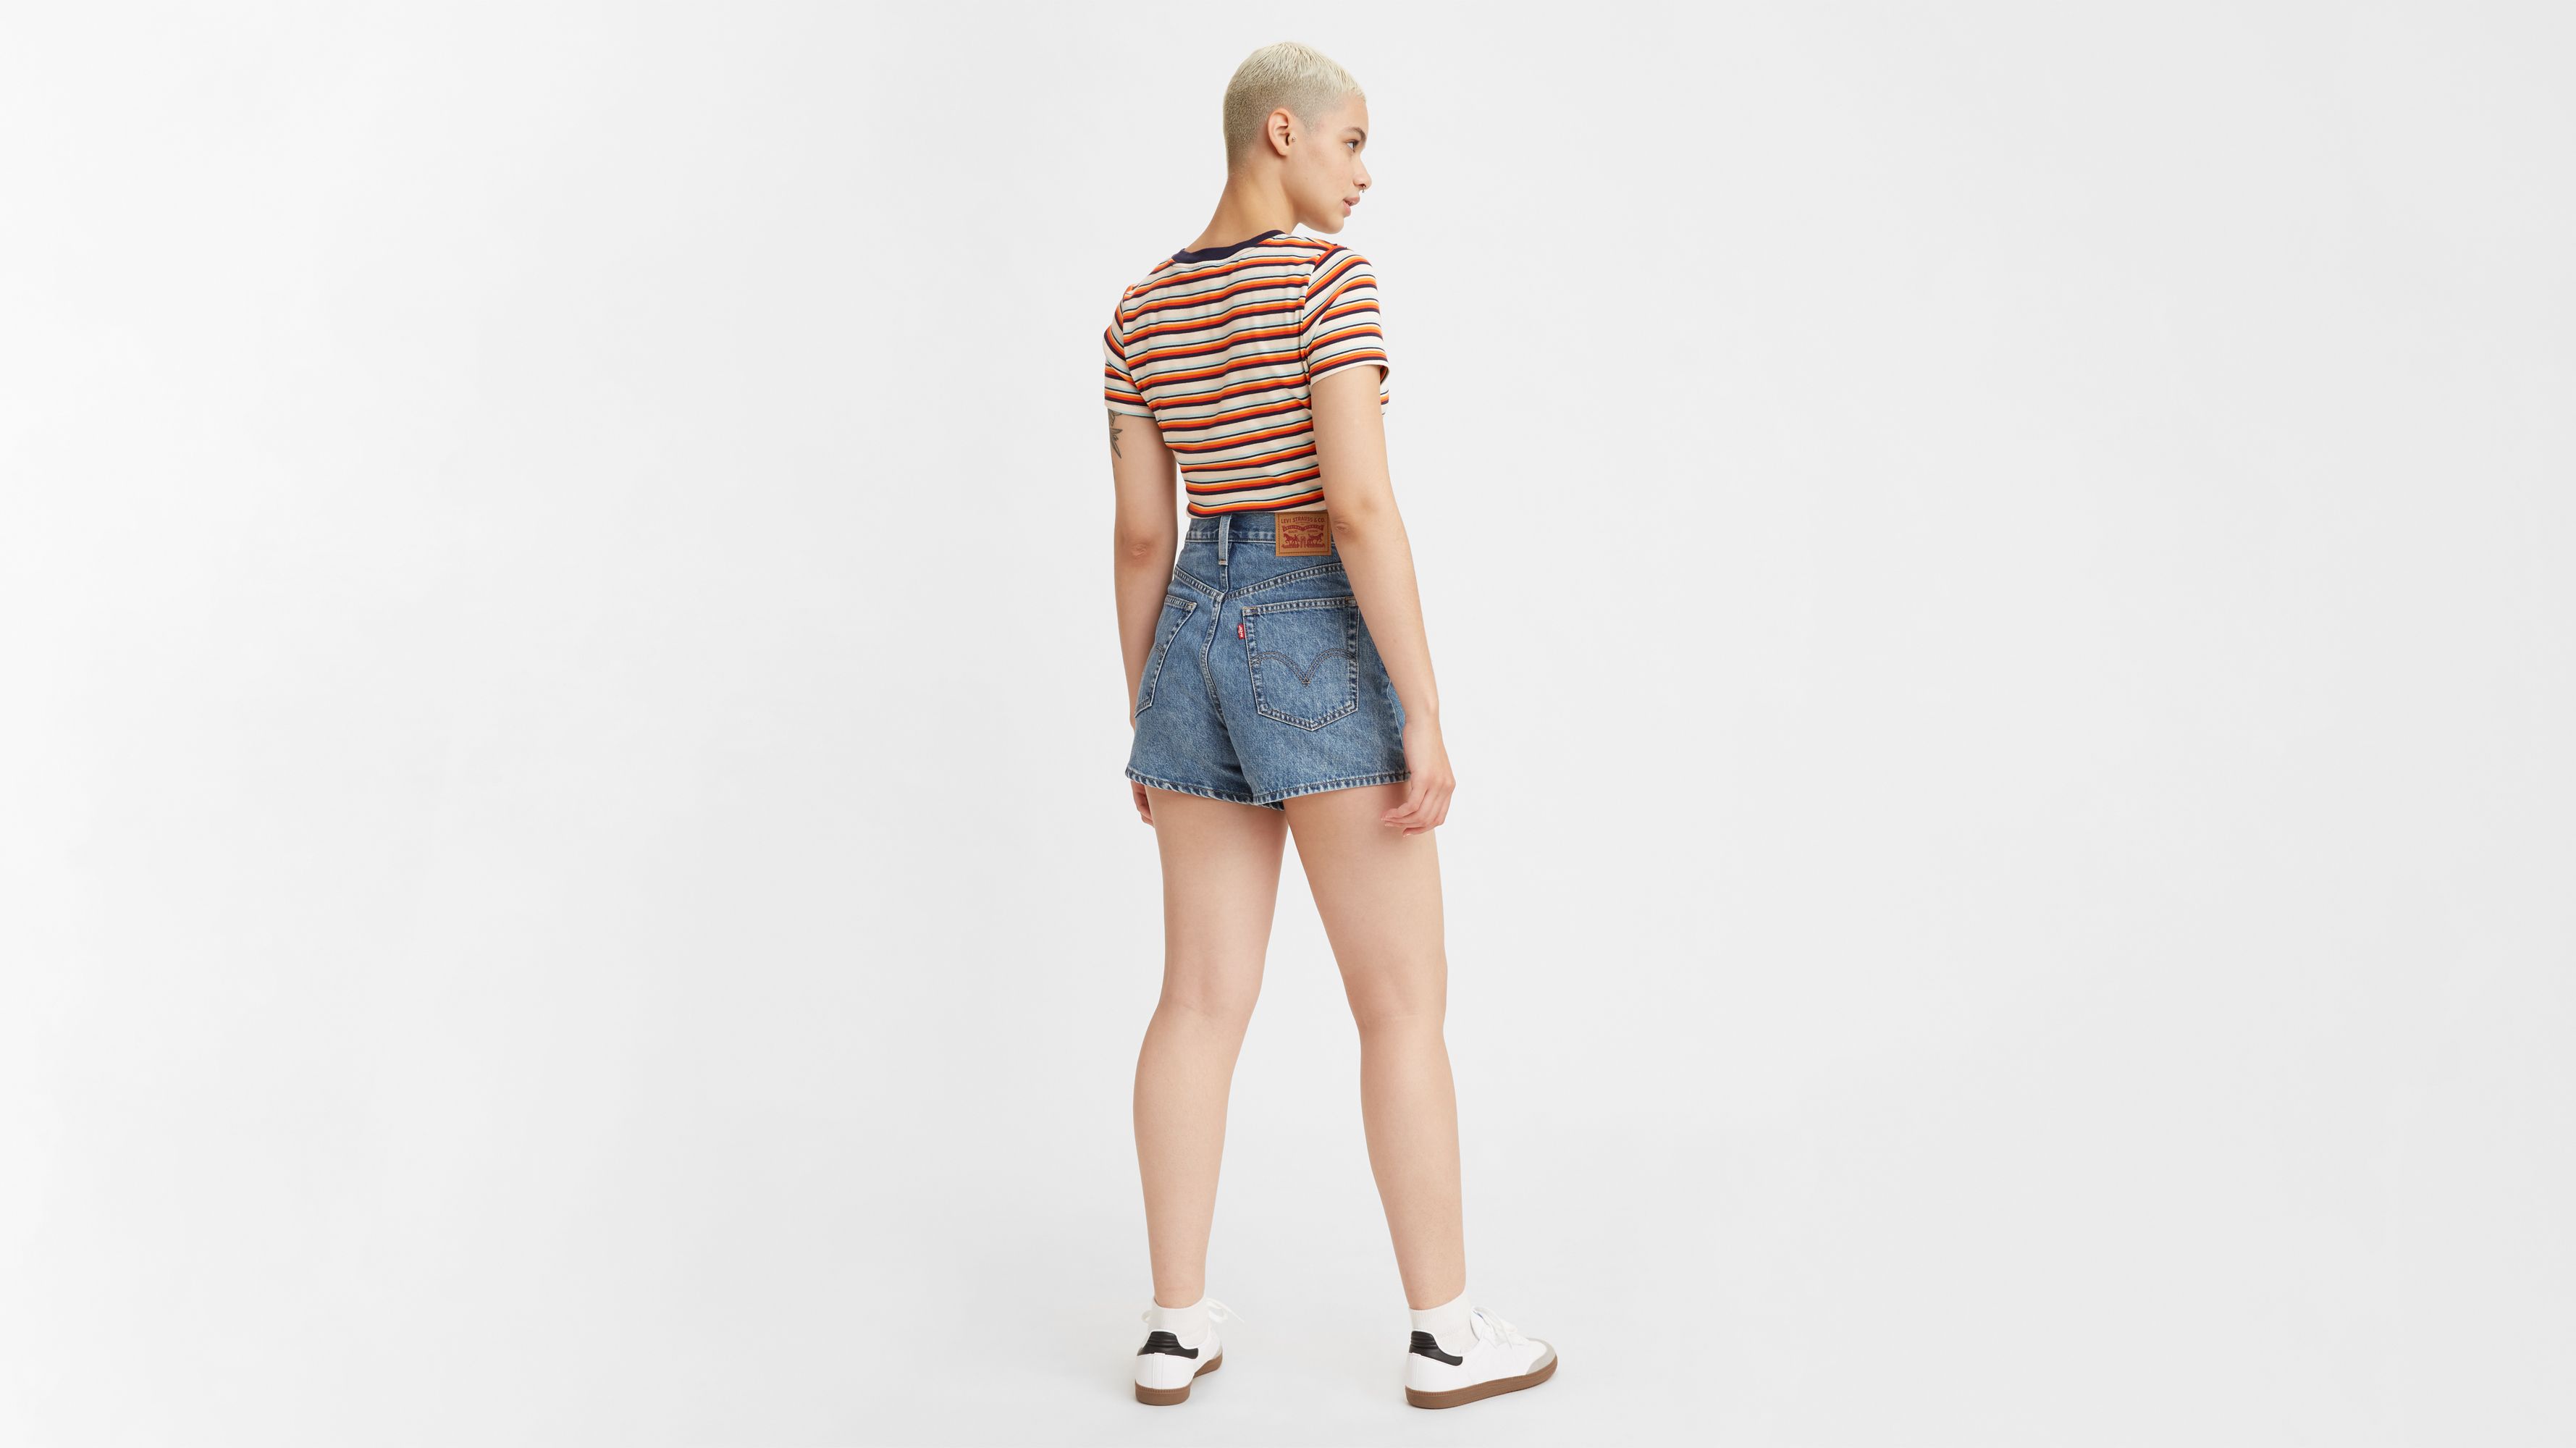 Levi's high waisted mom shorts in mid wash blue